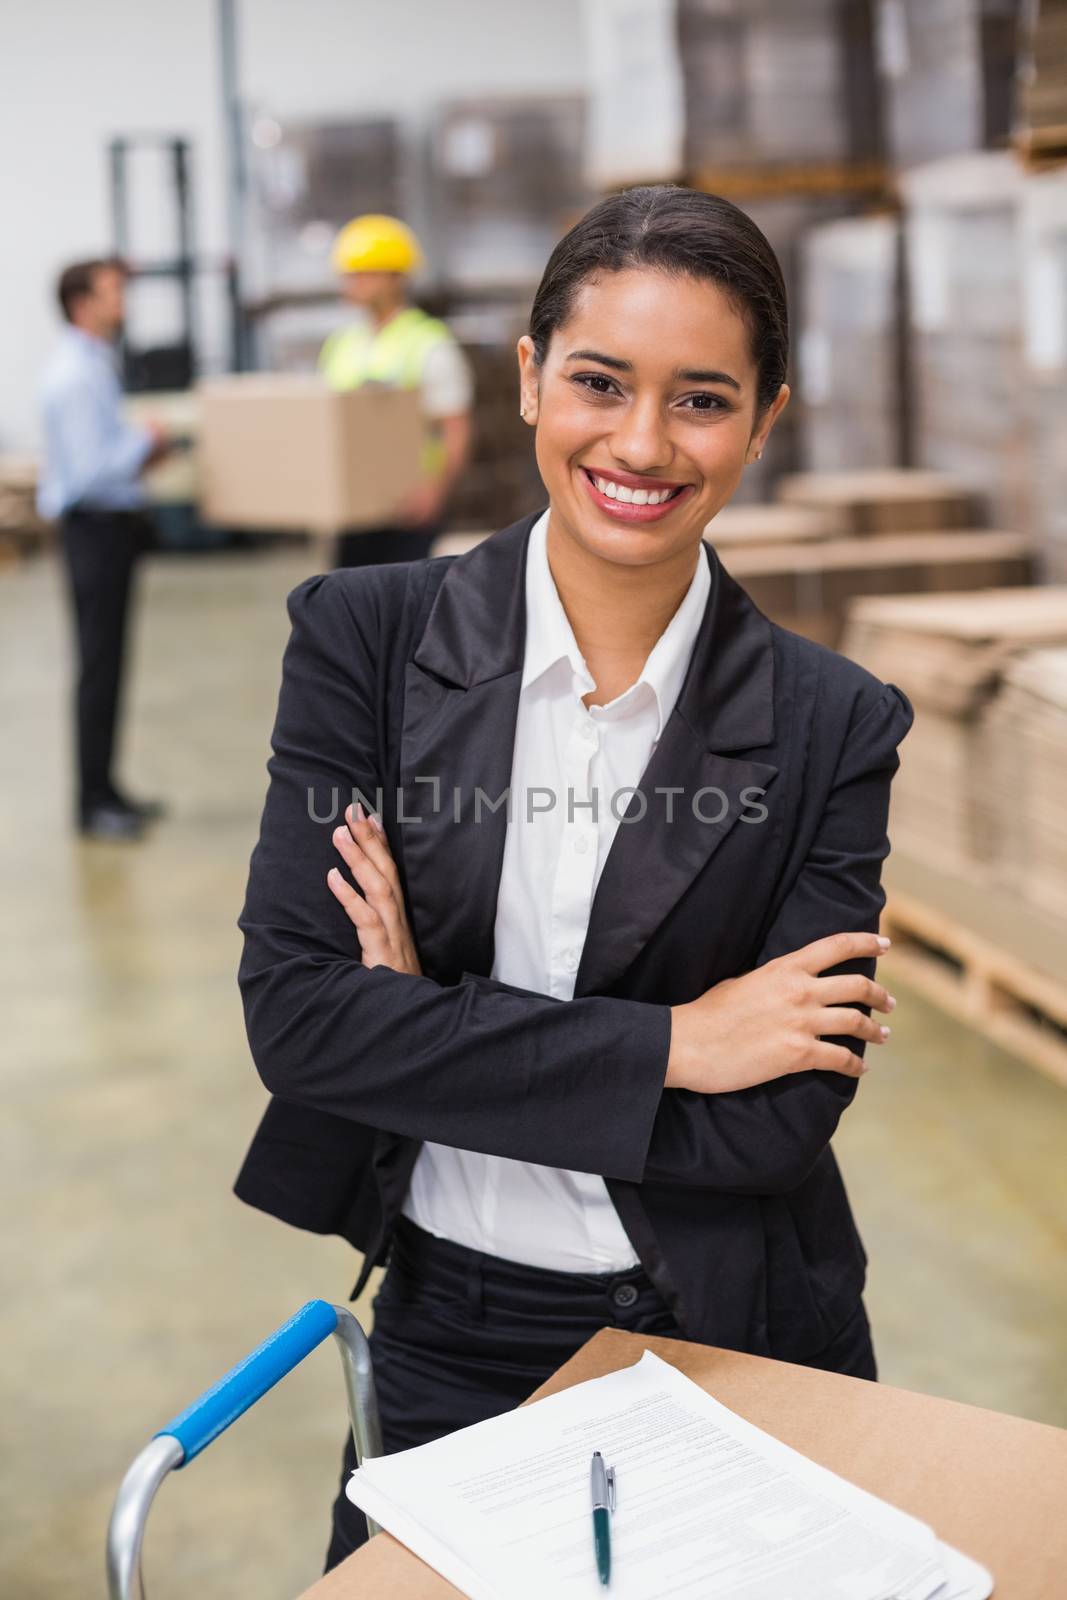 Portrait of smiling female manager with arms crossed in warehouse